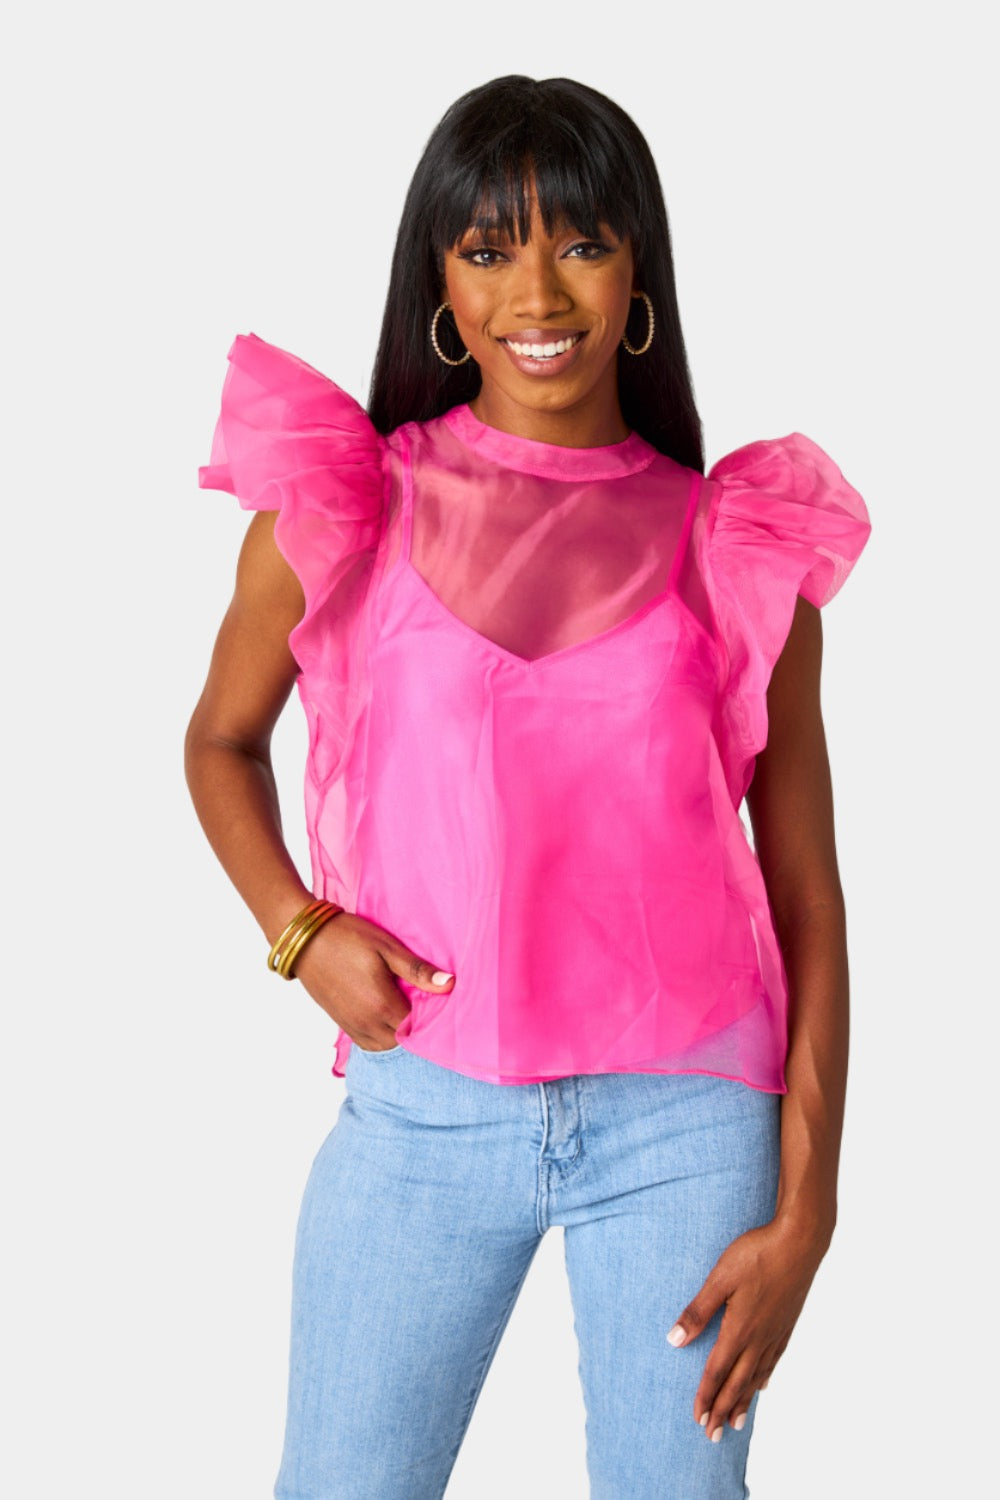 Pulled To Paradise Embroidered Top in Hot Pink